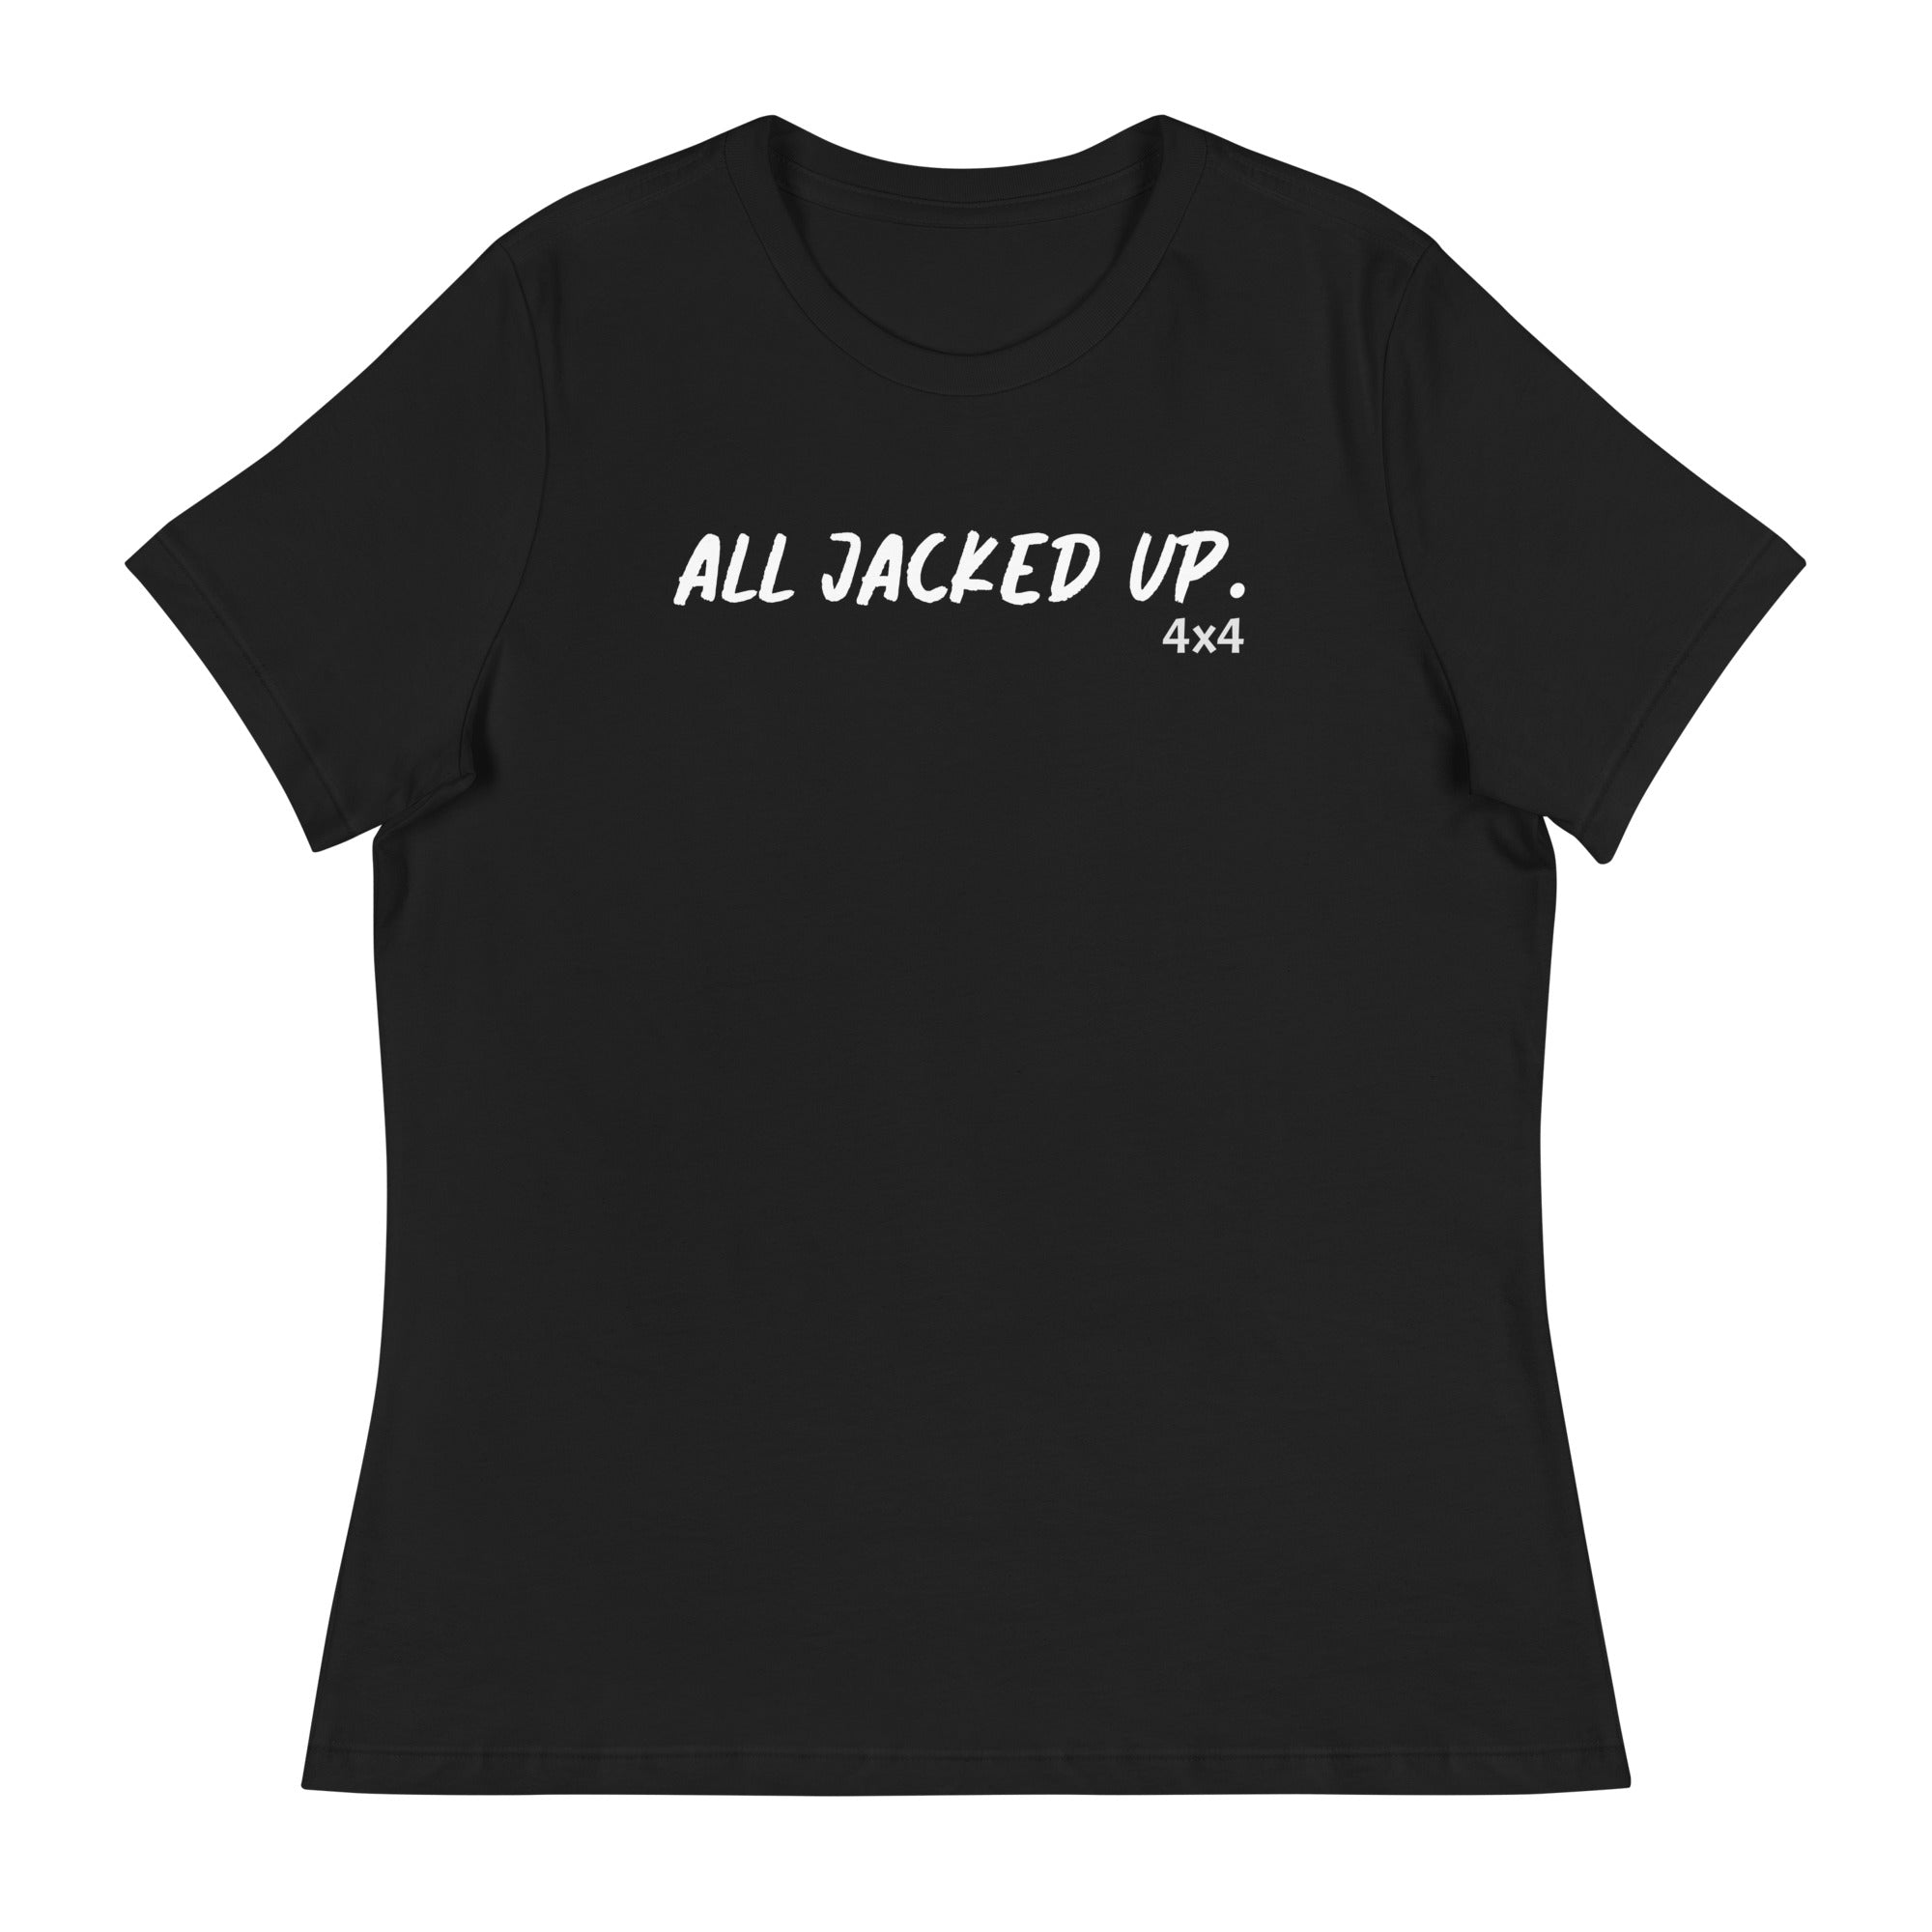 All jacked up-Women's Relaxed T-Shirt